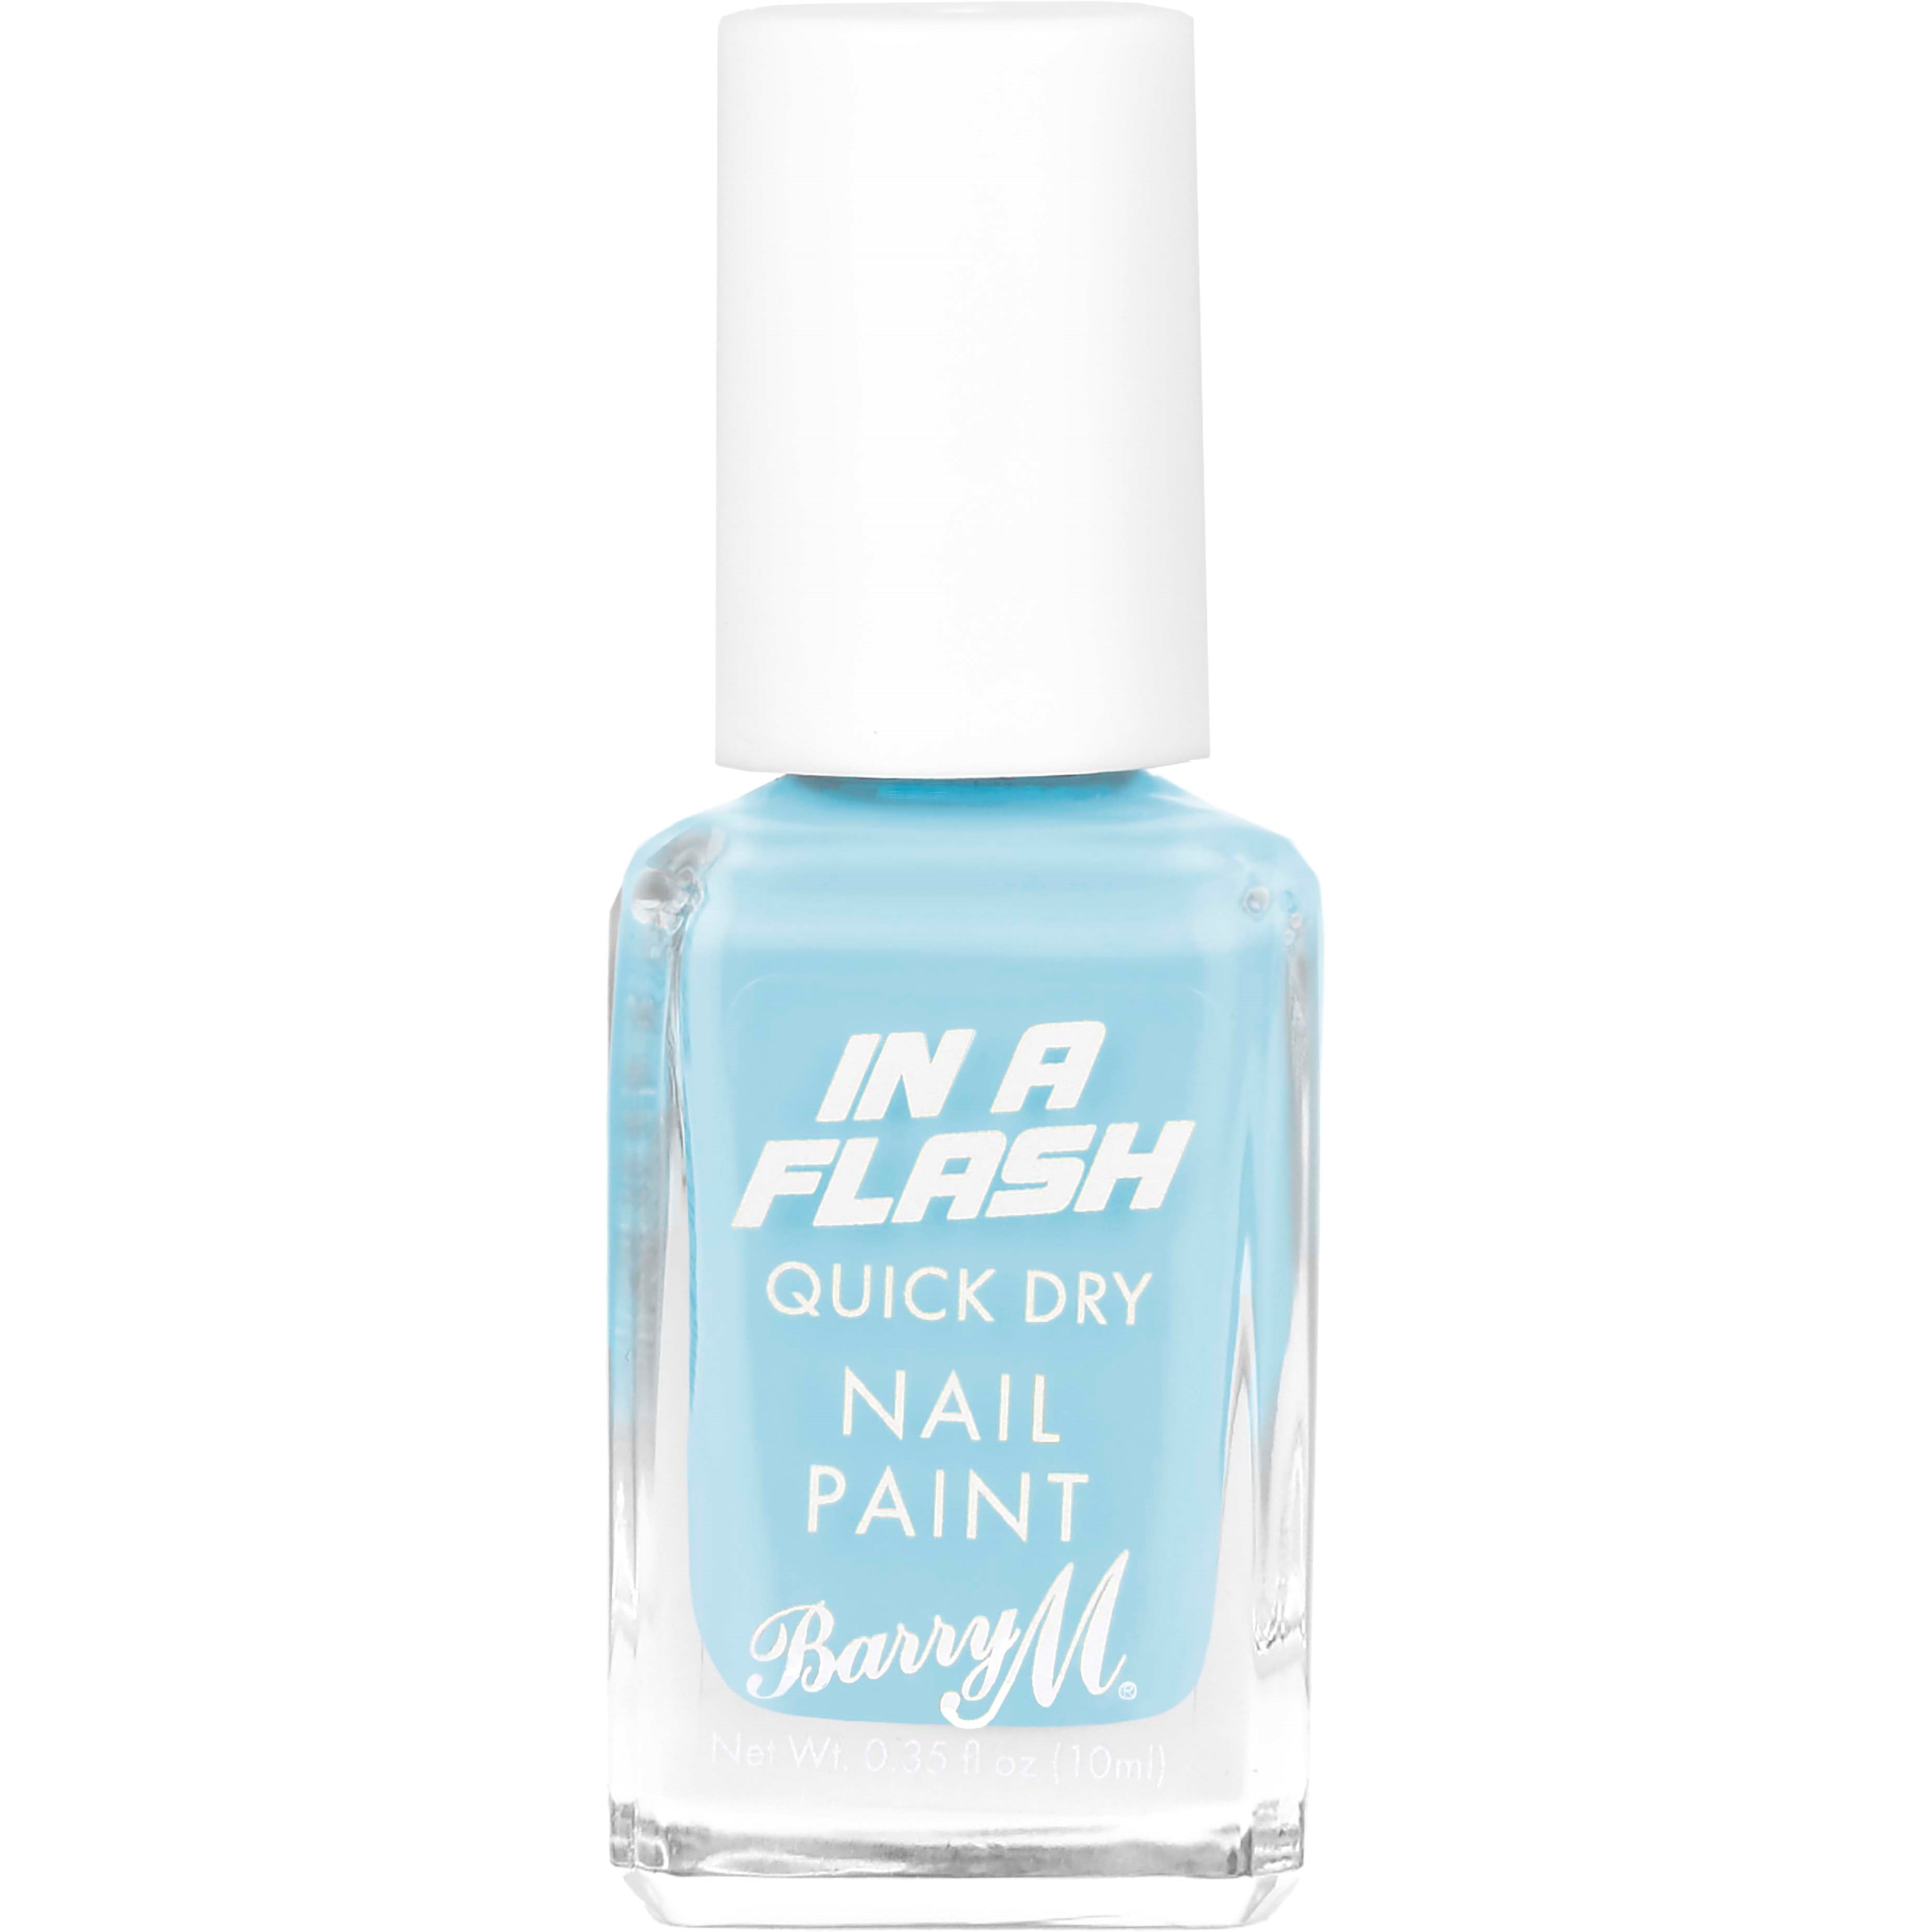 Barry m in a flash quick dry nail paint speedy sky blue